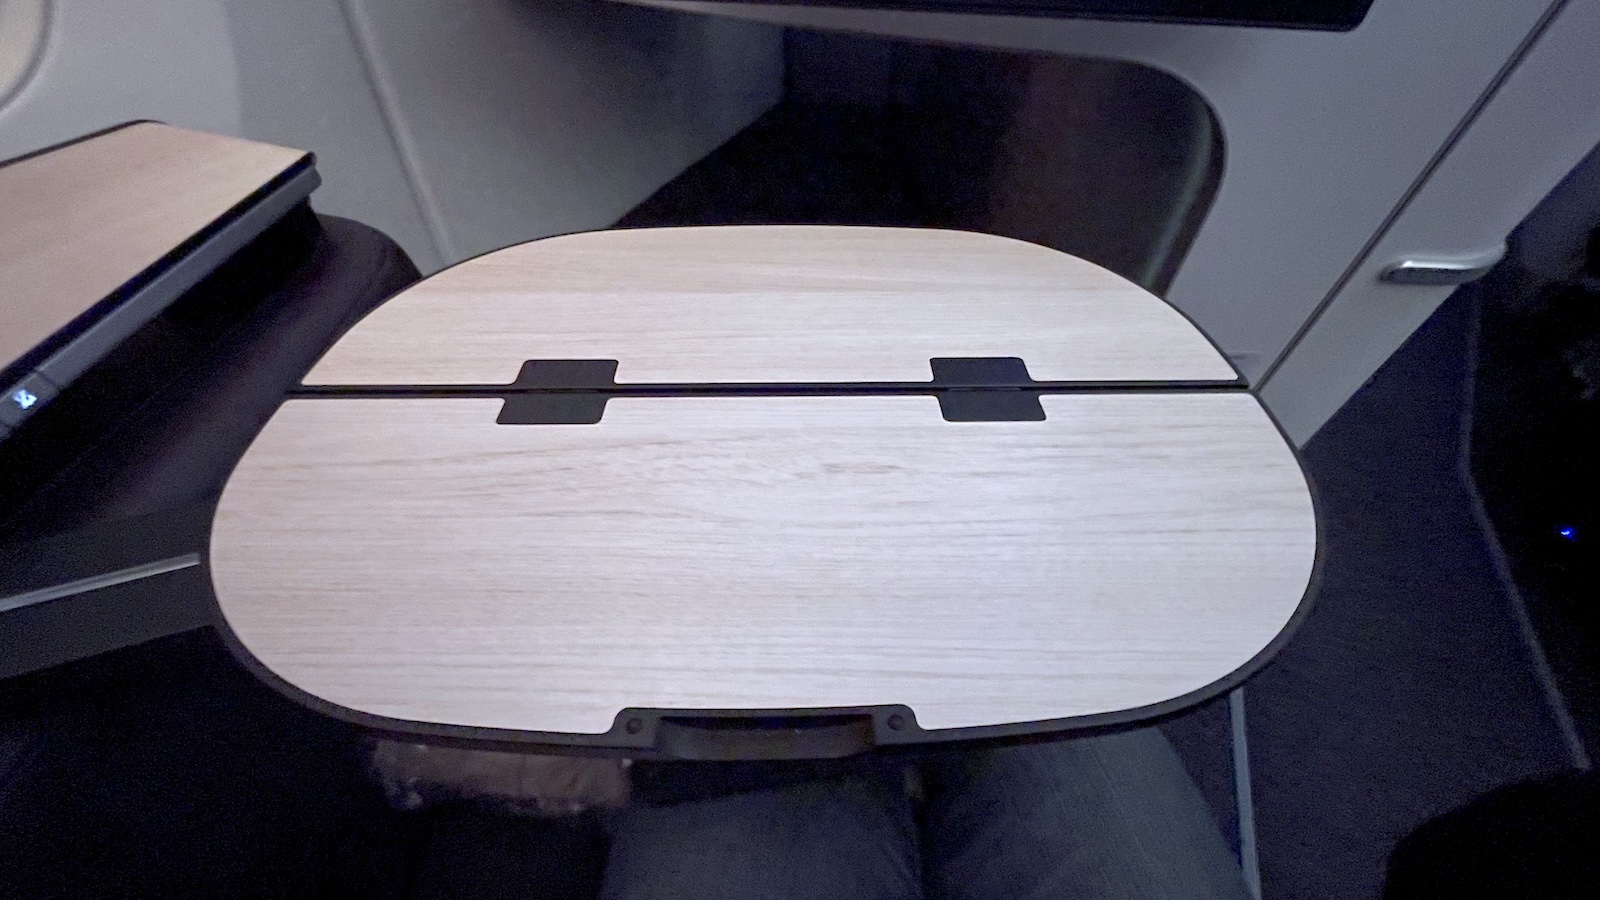 Finnair A350 Business Class Seat Fold Out Table